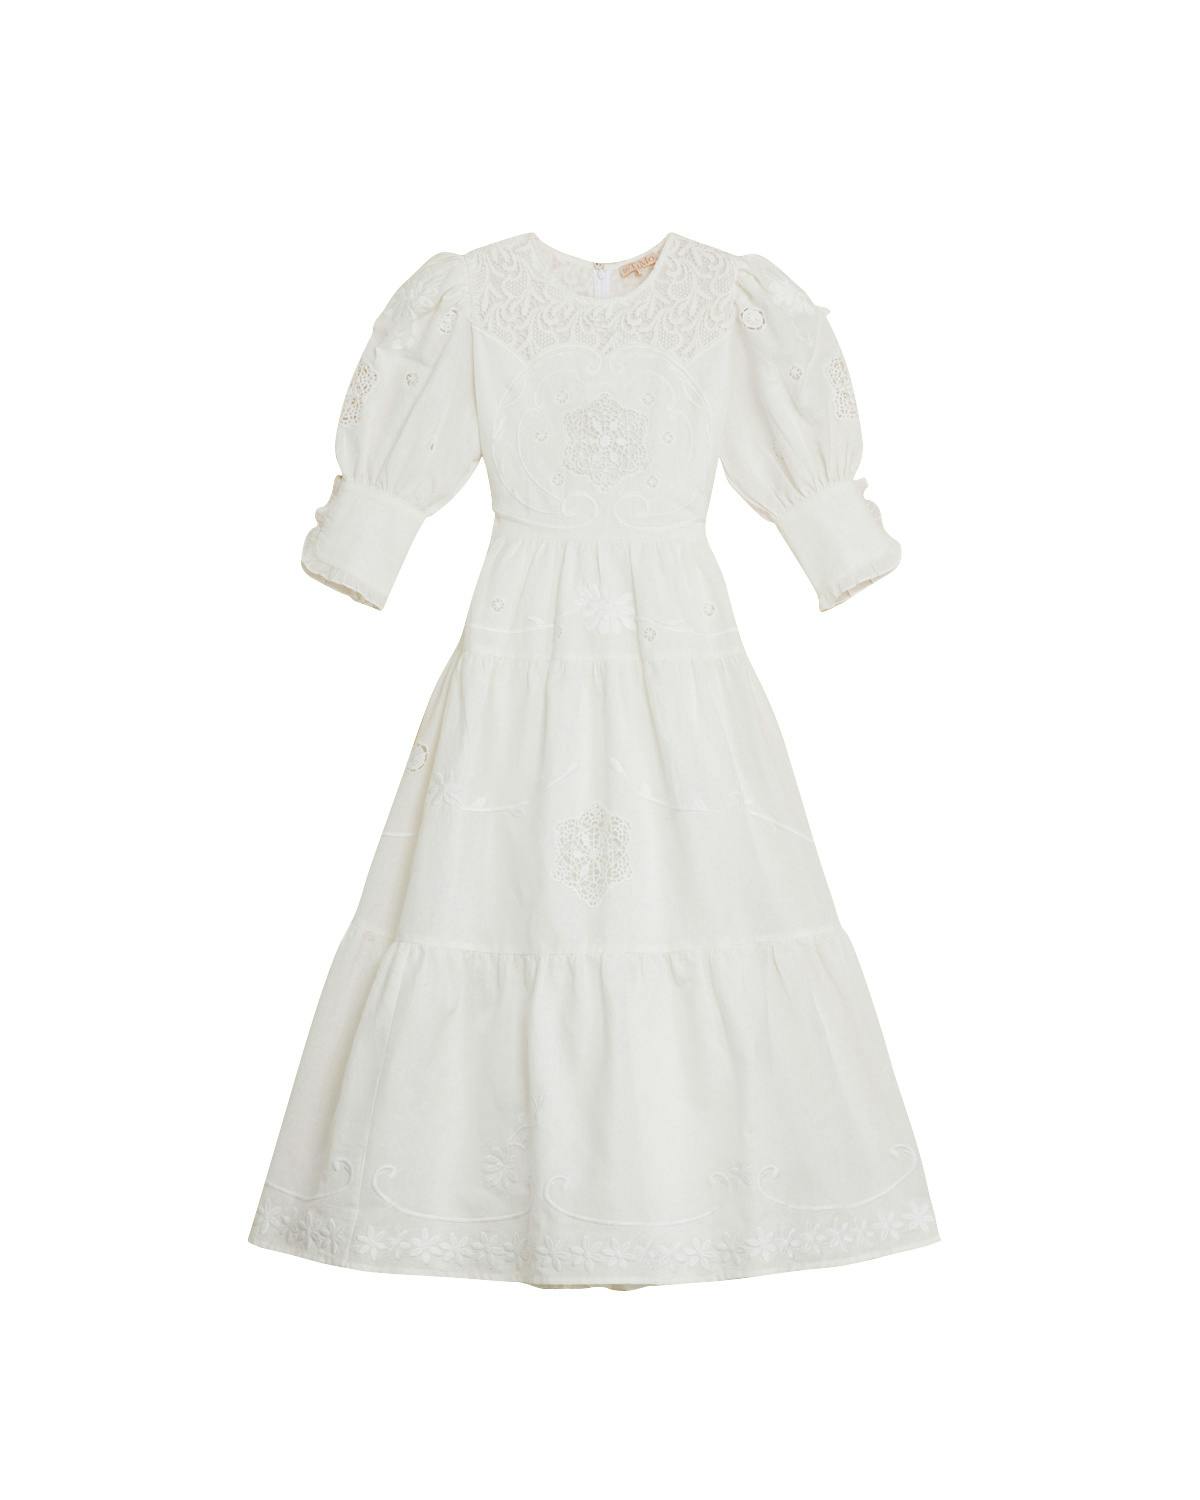 Linen Embroidery Gown, White. Image #7